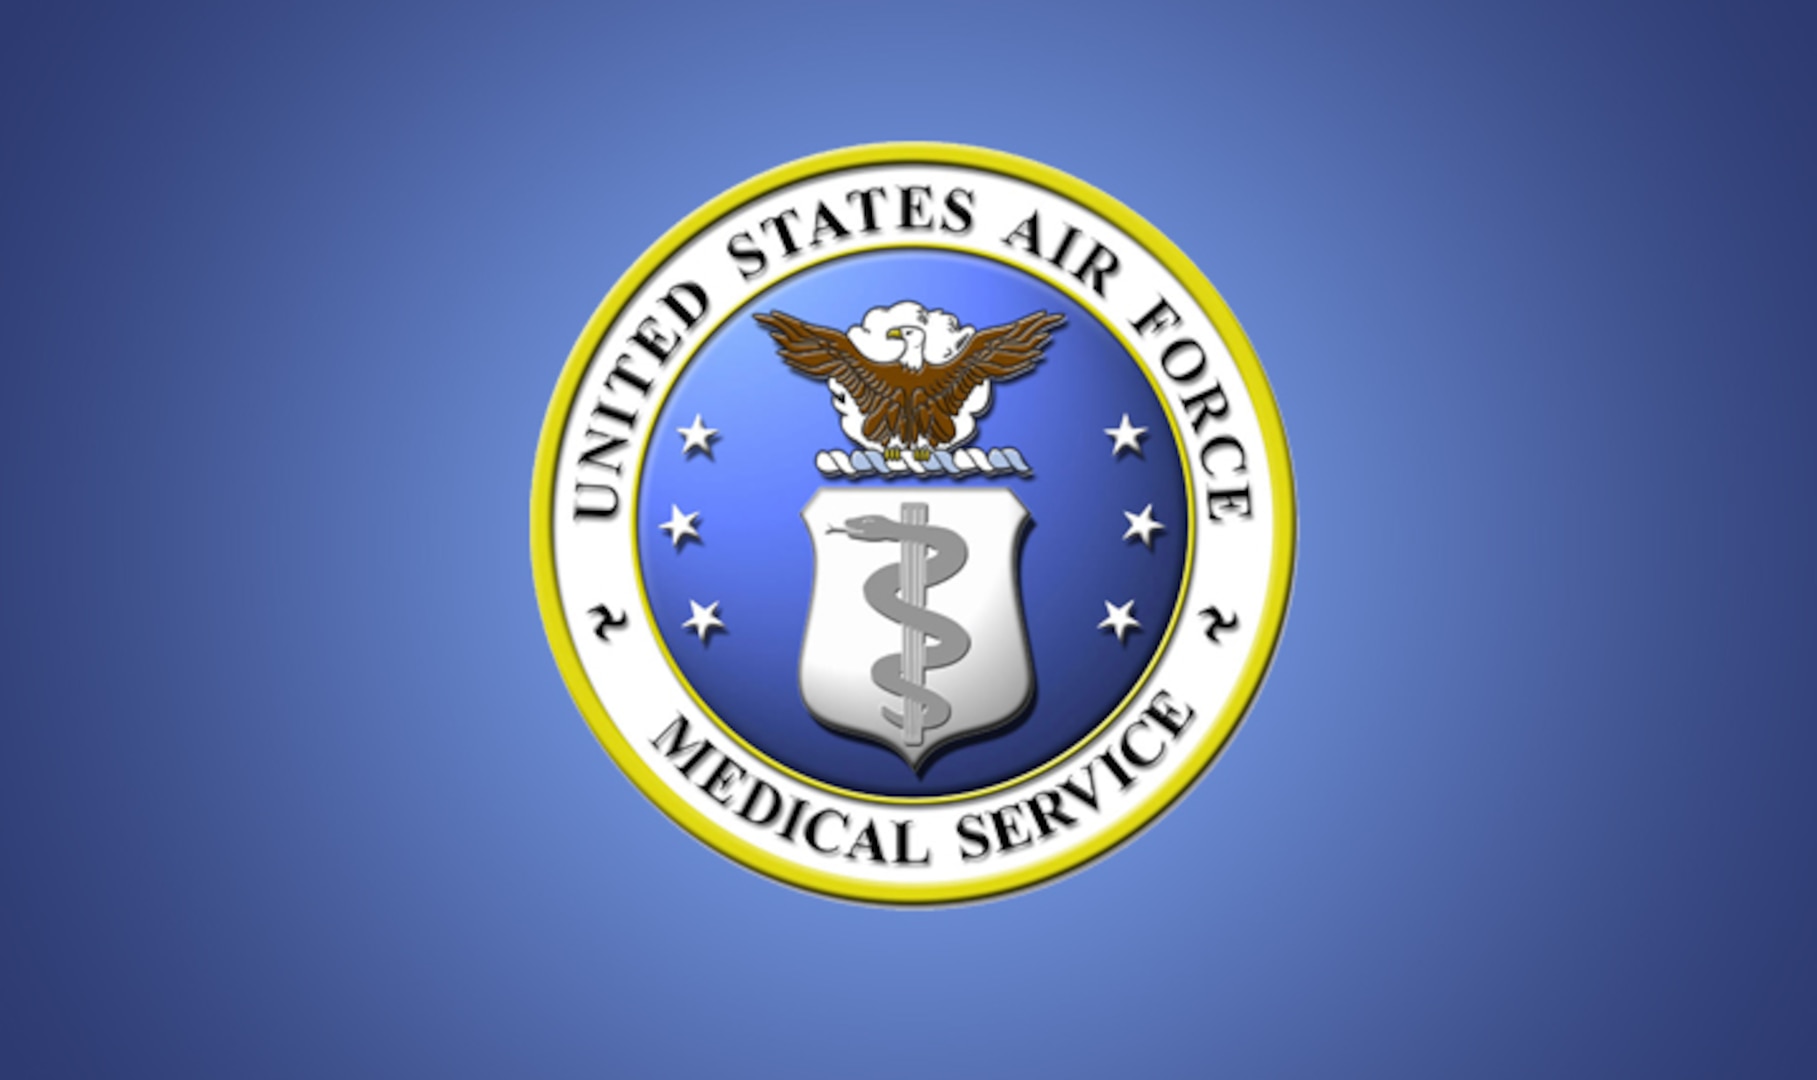 The Air Force Medical Service is in a time of transition, with new leadership, evolving readiness requirements and congressional mandates all affecting its future.